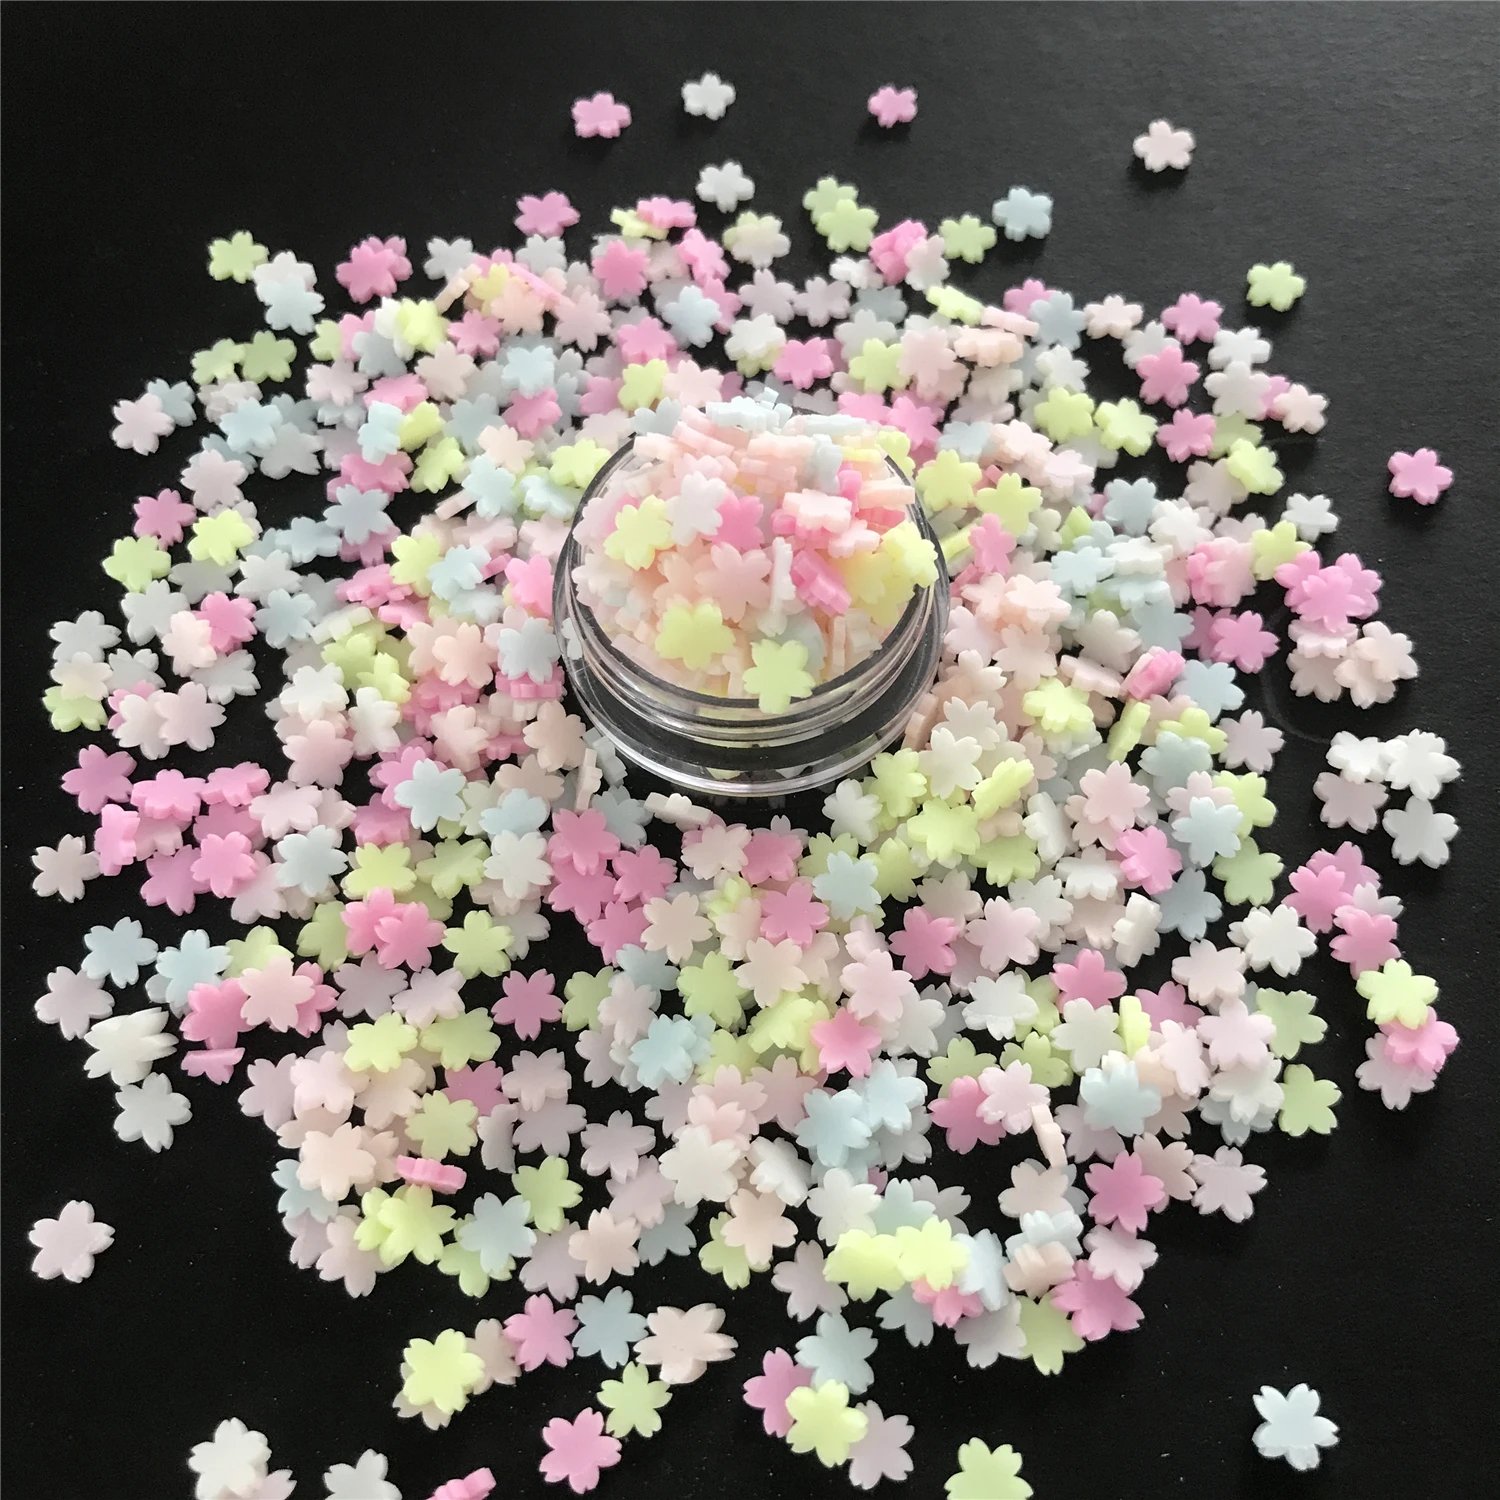 PrettyG 1 Box Cherry Blossoms Slices Supplies Polymer Soft Clay for Resin Craft Nail Art Crafts Fimo Slime Kit DIY Decoration